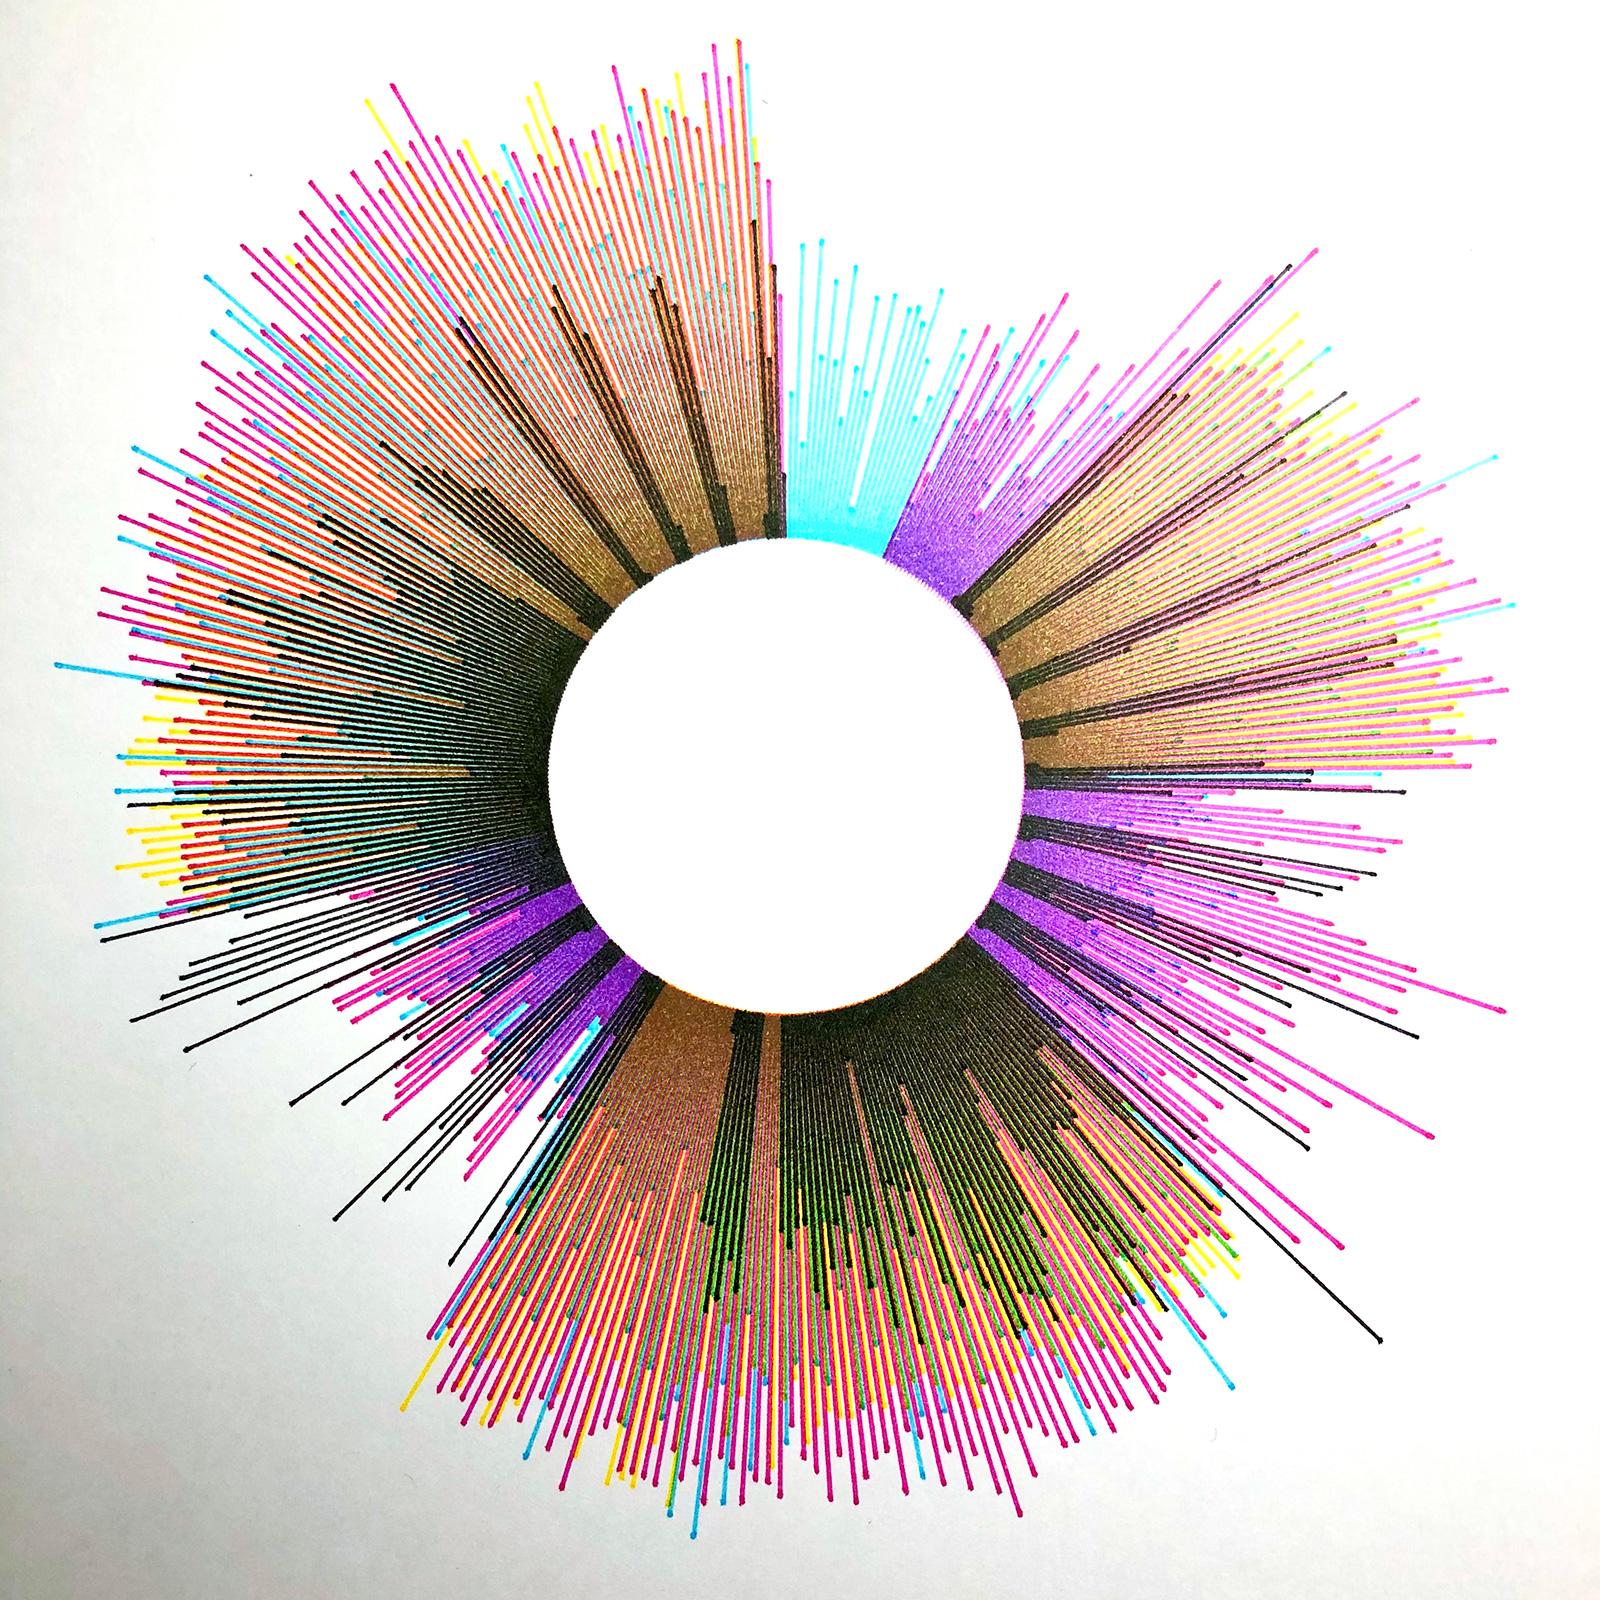 A white circle is surrounded by spikes of colour shooting from a central position, the length of each line representing a moment in the audio track’s waveform